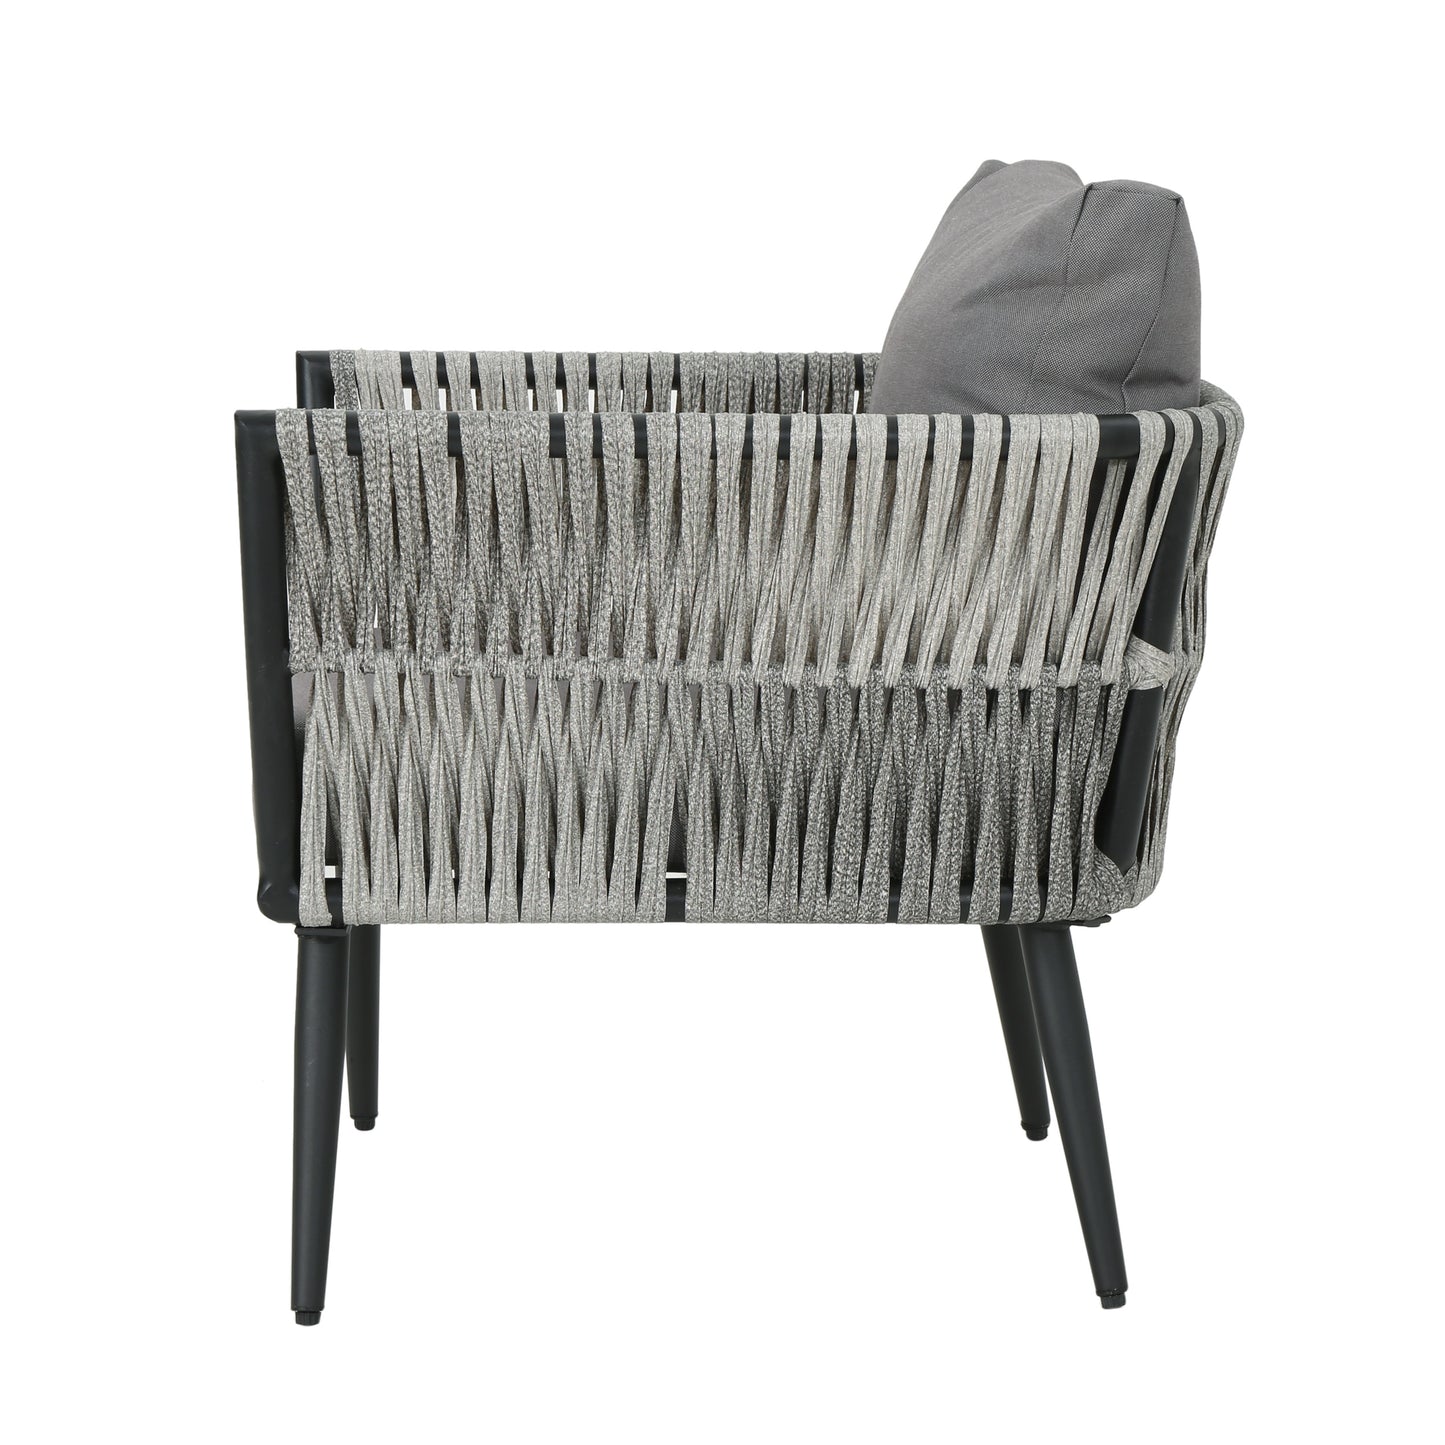 Shipley Outdoor Wicker and Aluminum Club Chair